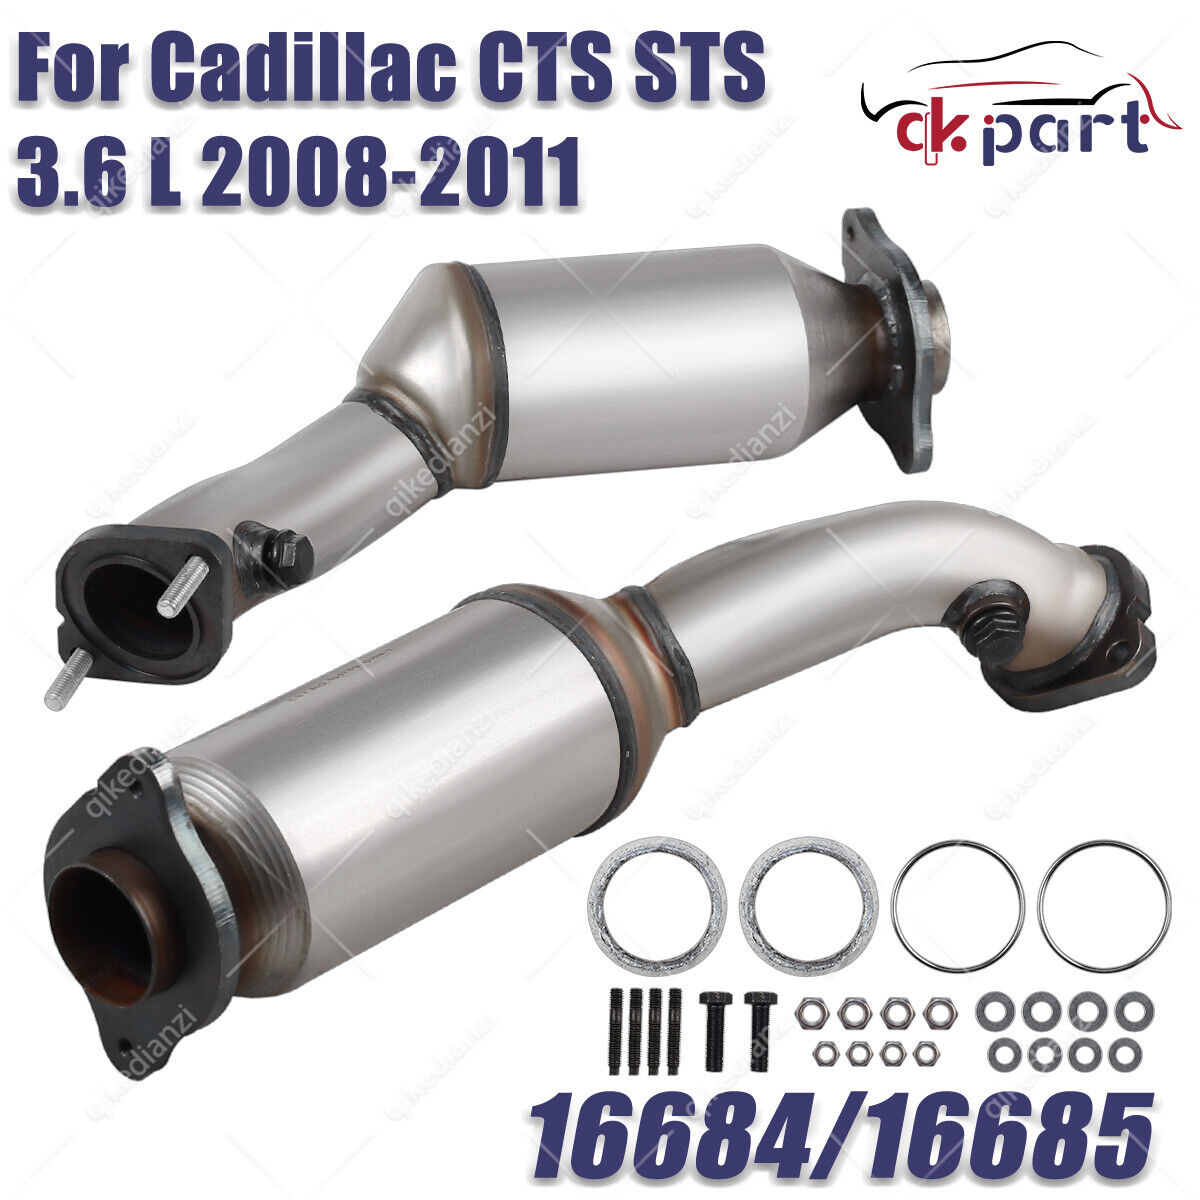 Exhaust Catalytic Converter For 2008 2009 2010 2011 Cadillac CTS STS 3.6L V6